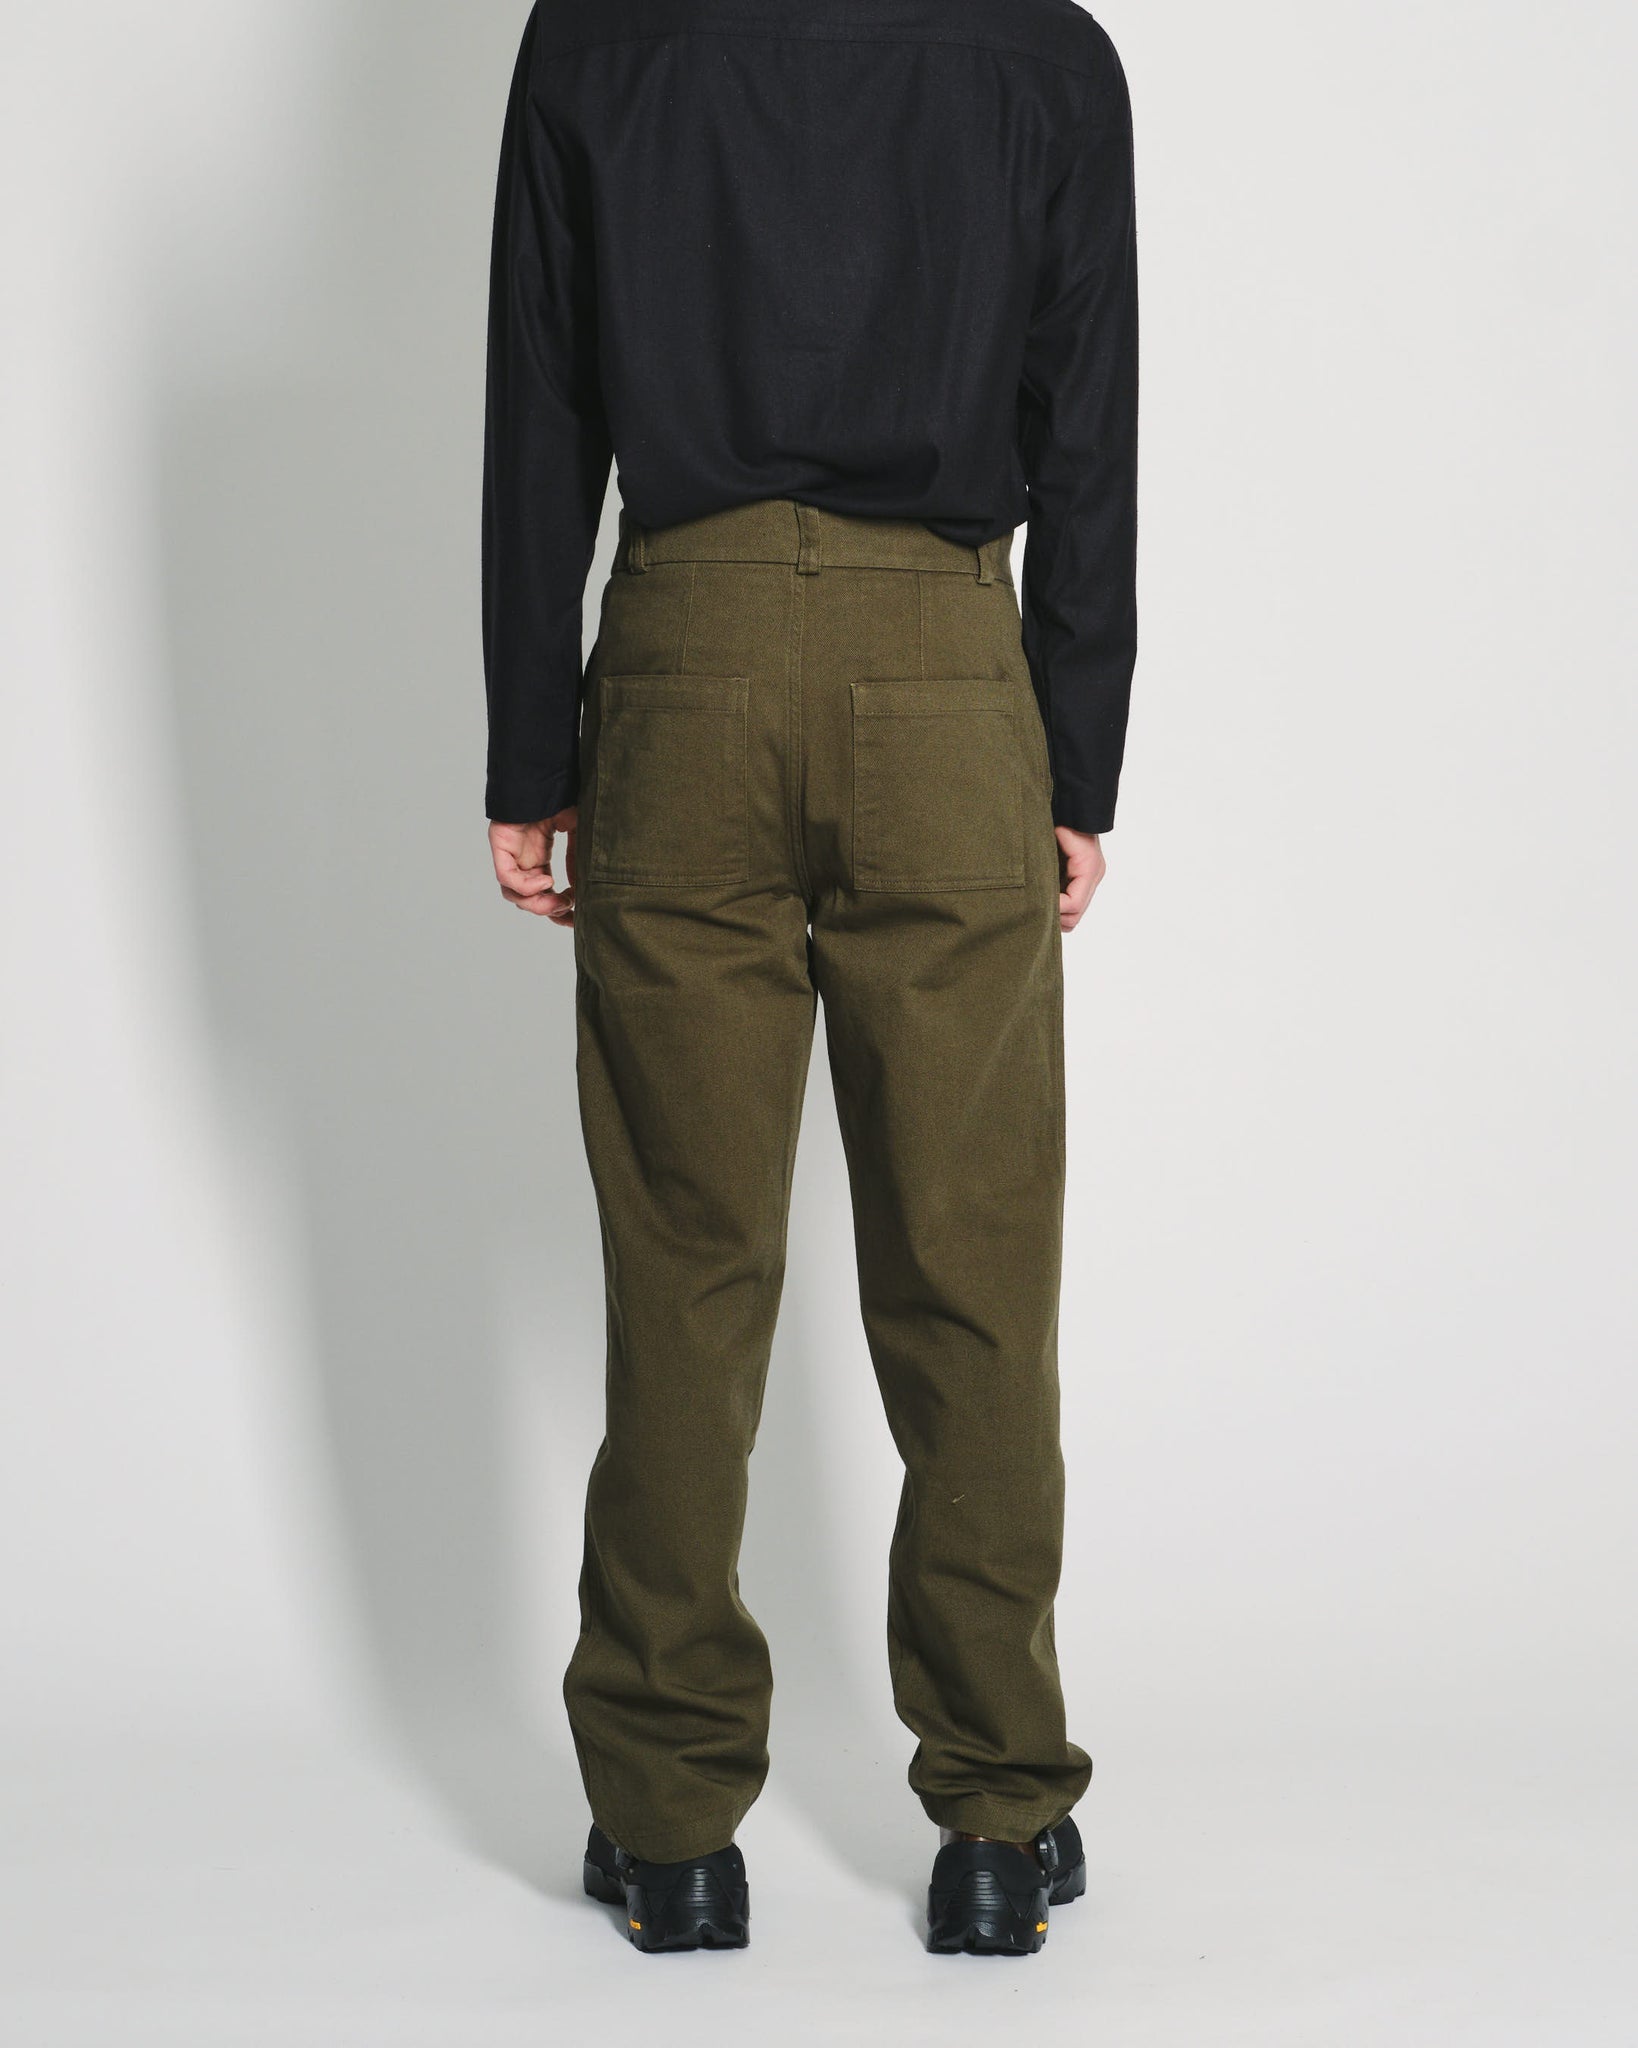 Another Pants 2.0 - Green